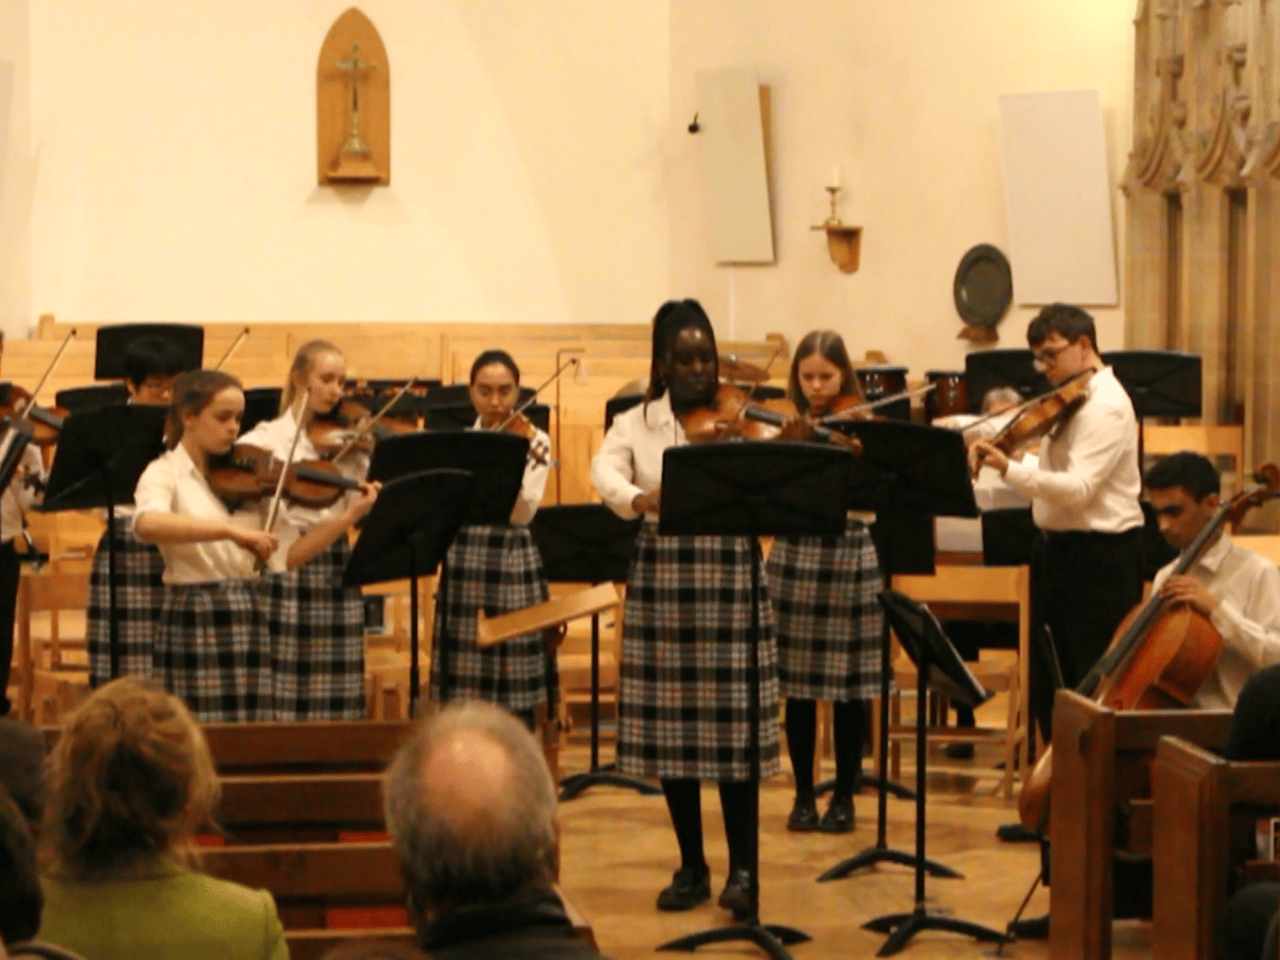 Student soloists (two violins and one cello) perform with orchestra in concert